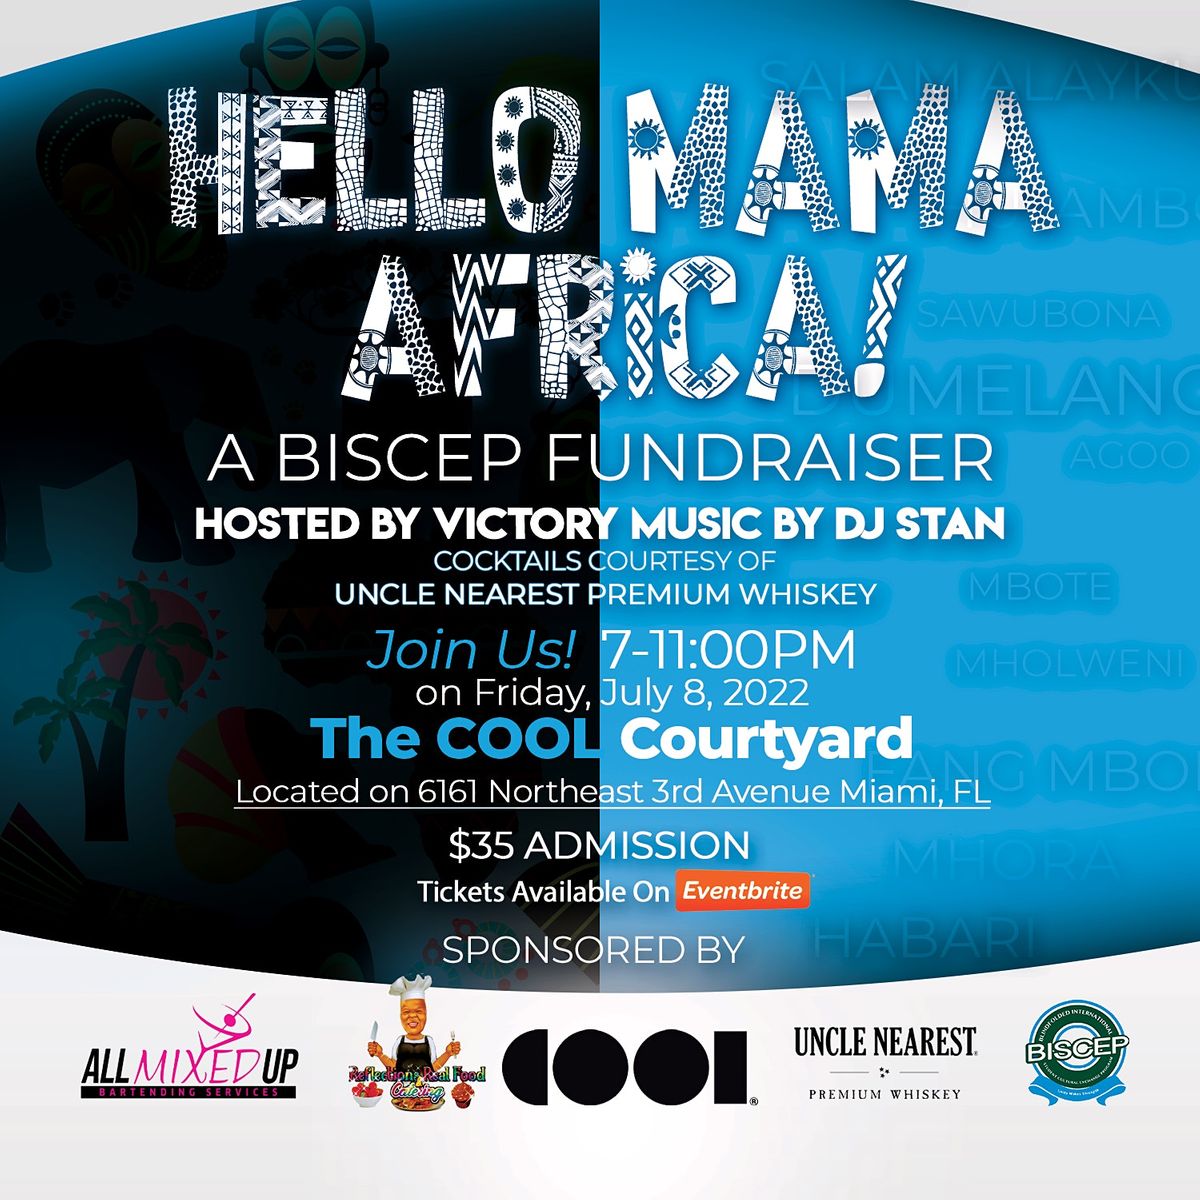 "Hello Mama Africa" A BISCEP Fundraiser